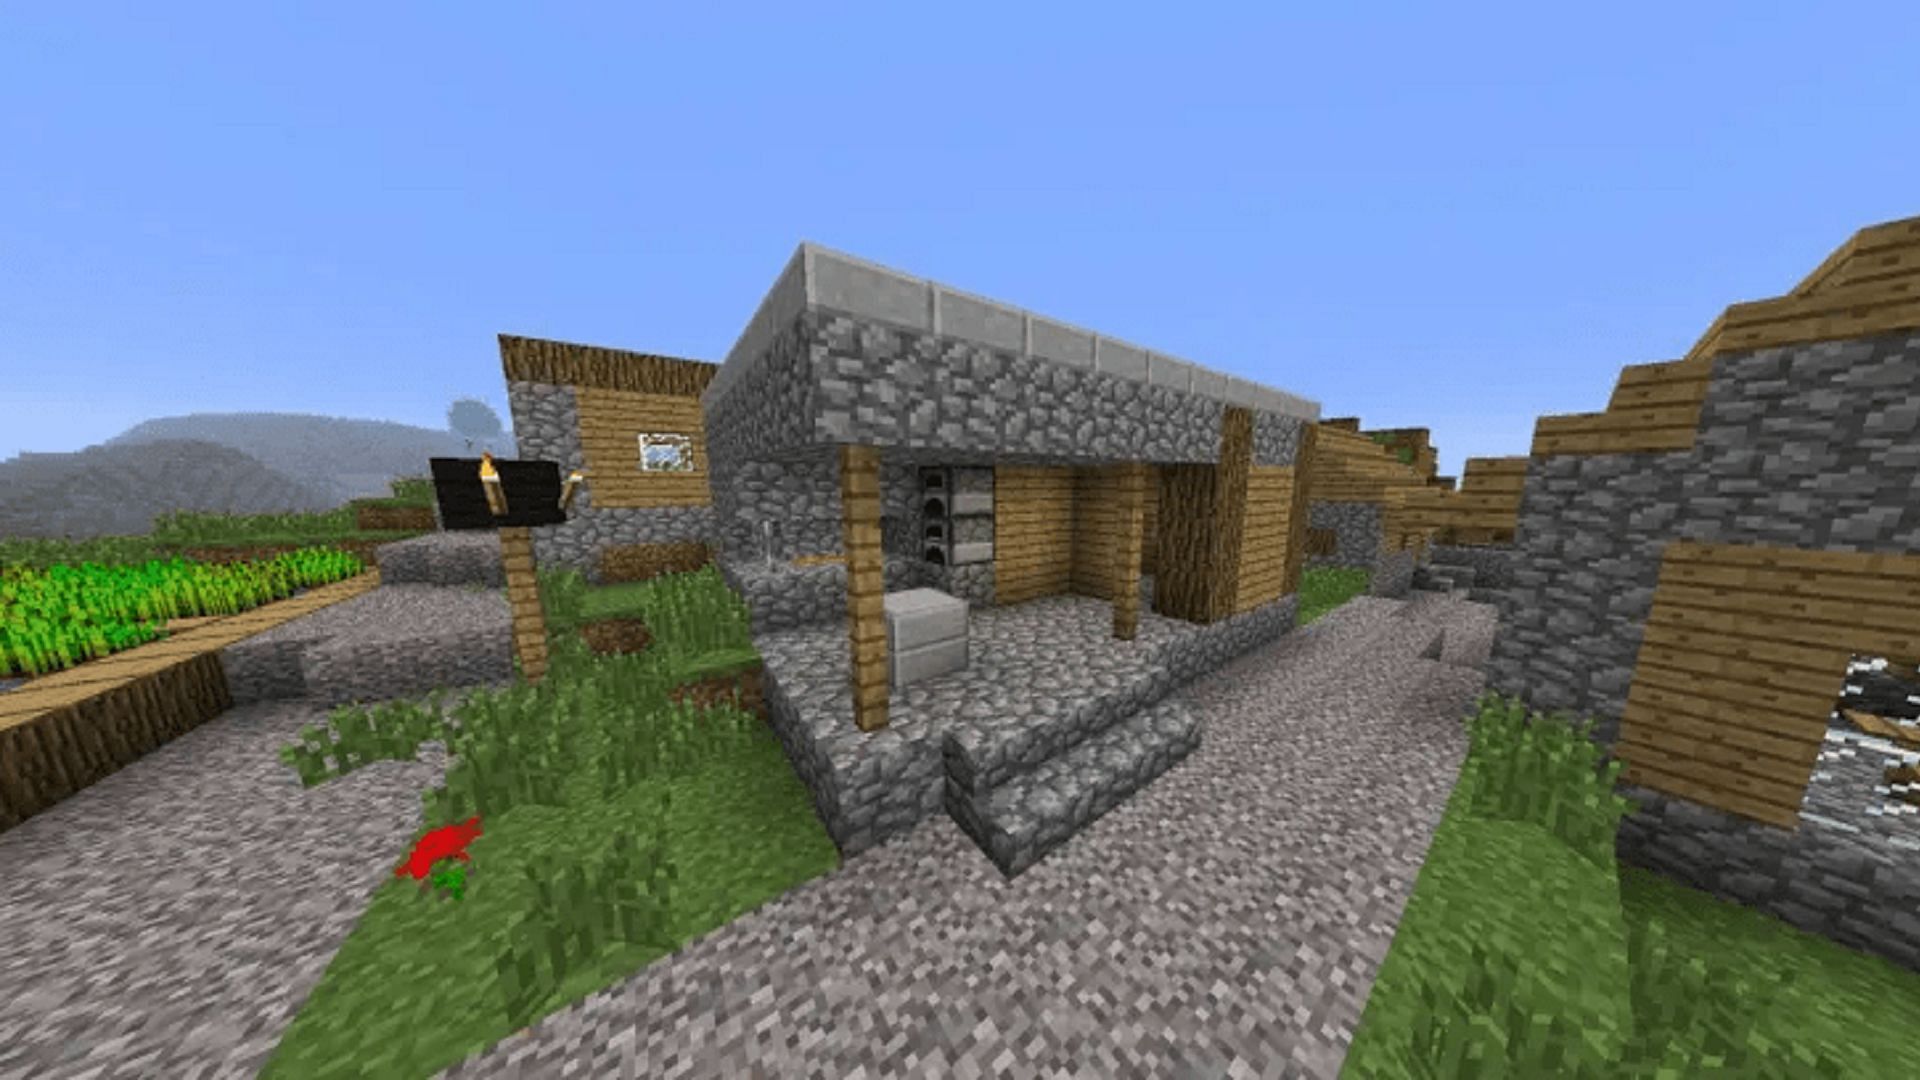 Blacksmiths are a huge help early on in Minecraft adventures (Image via Mojang)